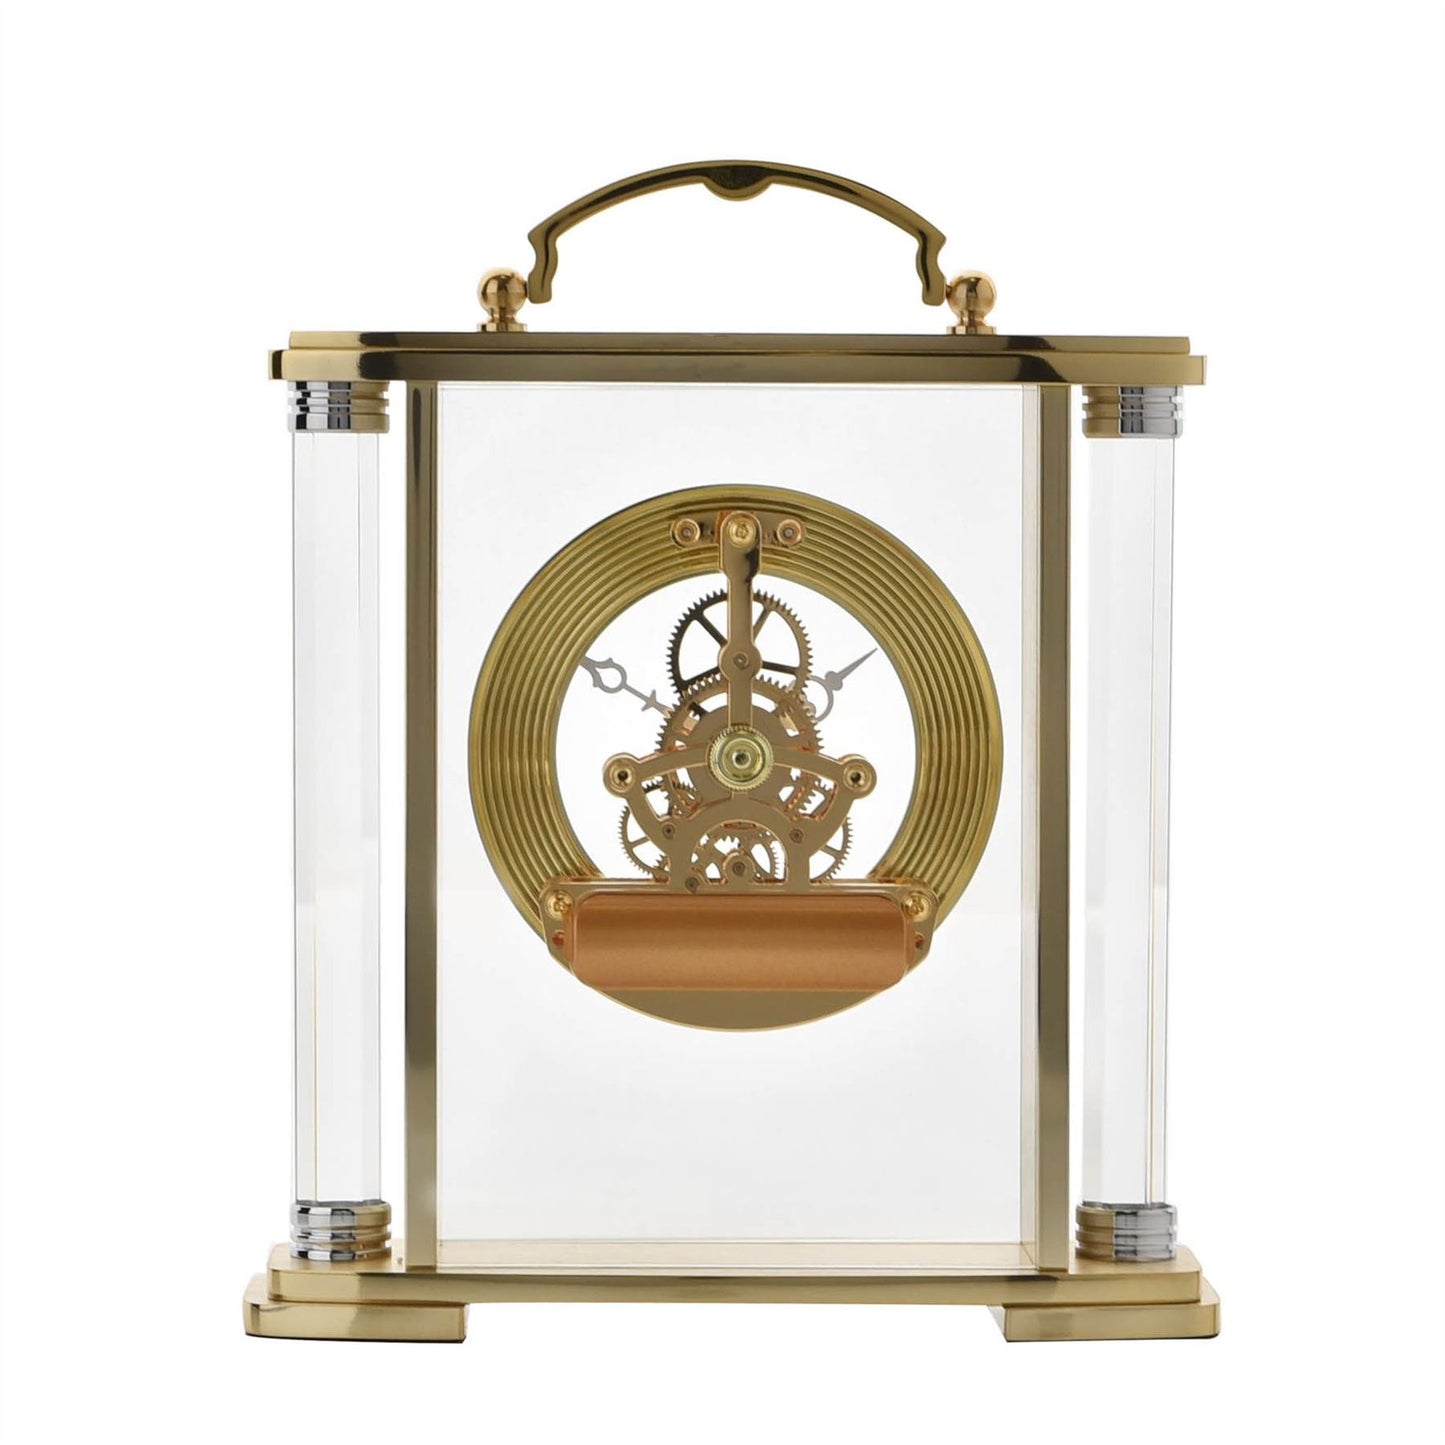 Wm. Widdop Mantel Clock with Handle Skeleton Movement W2918-19 Available Multiple Colour